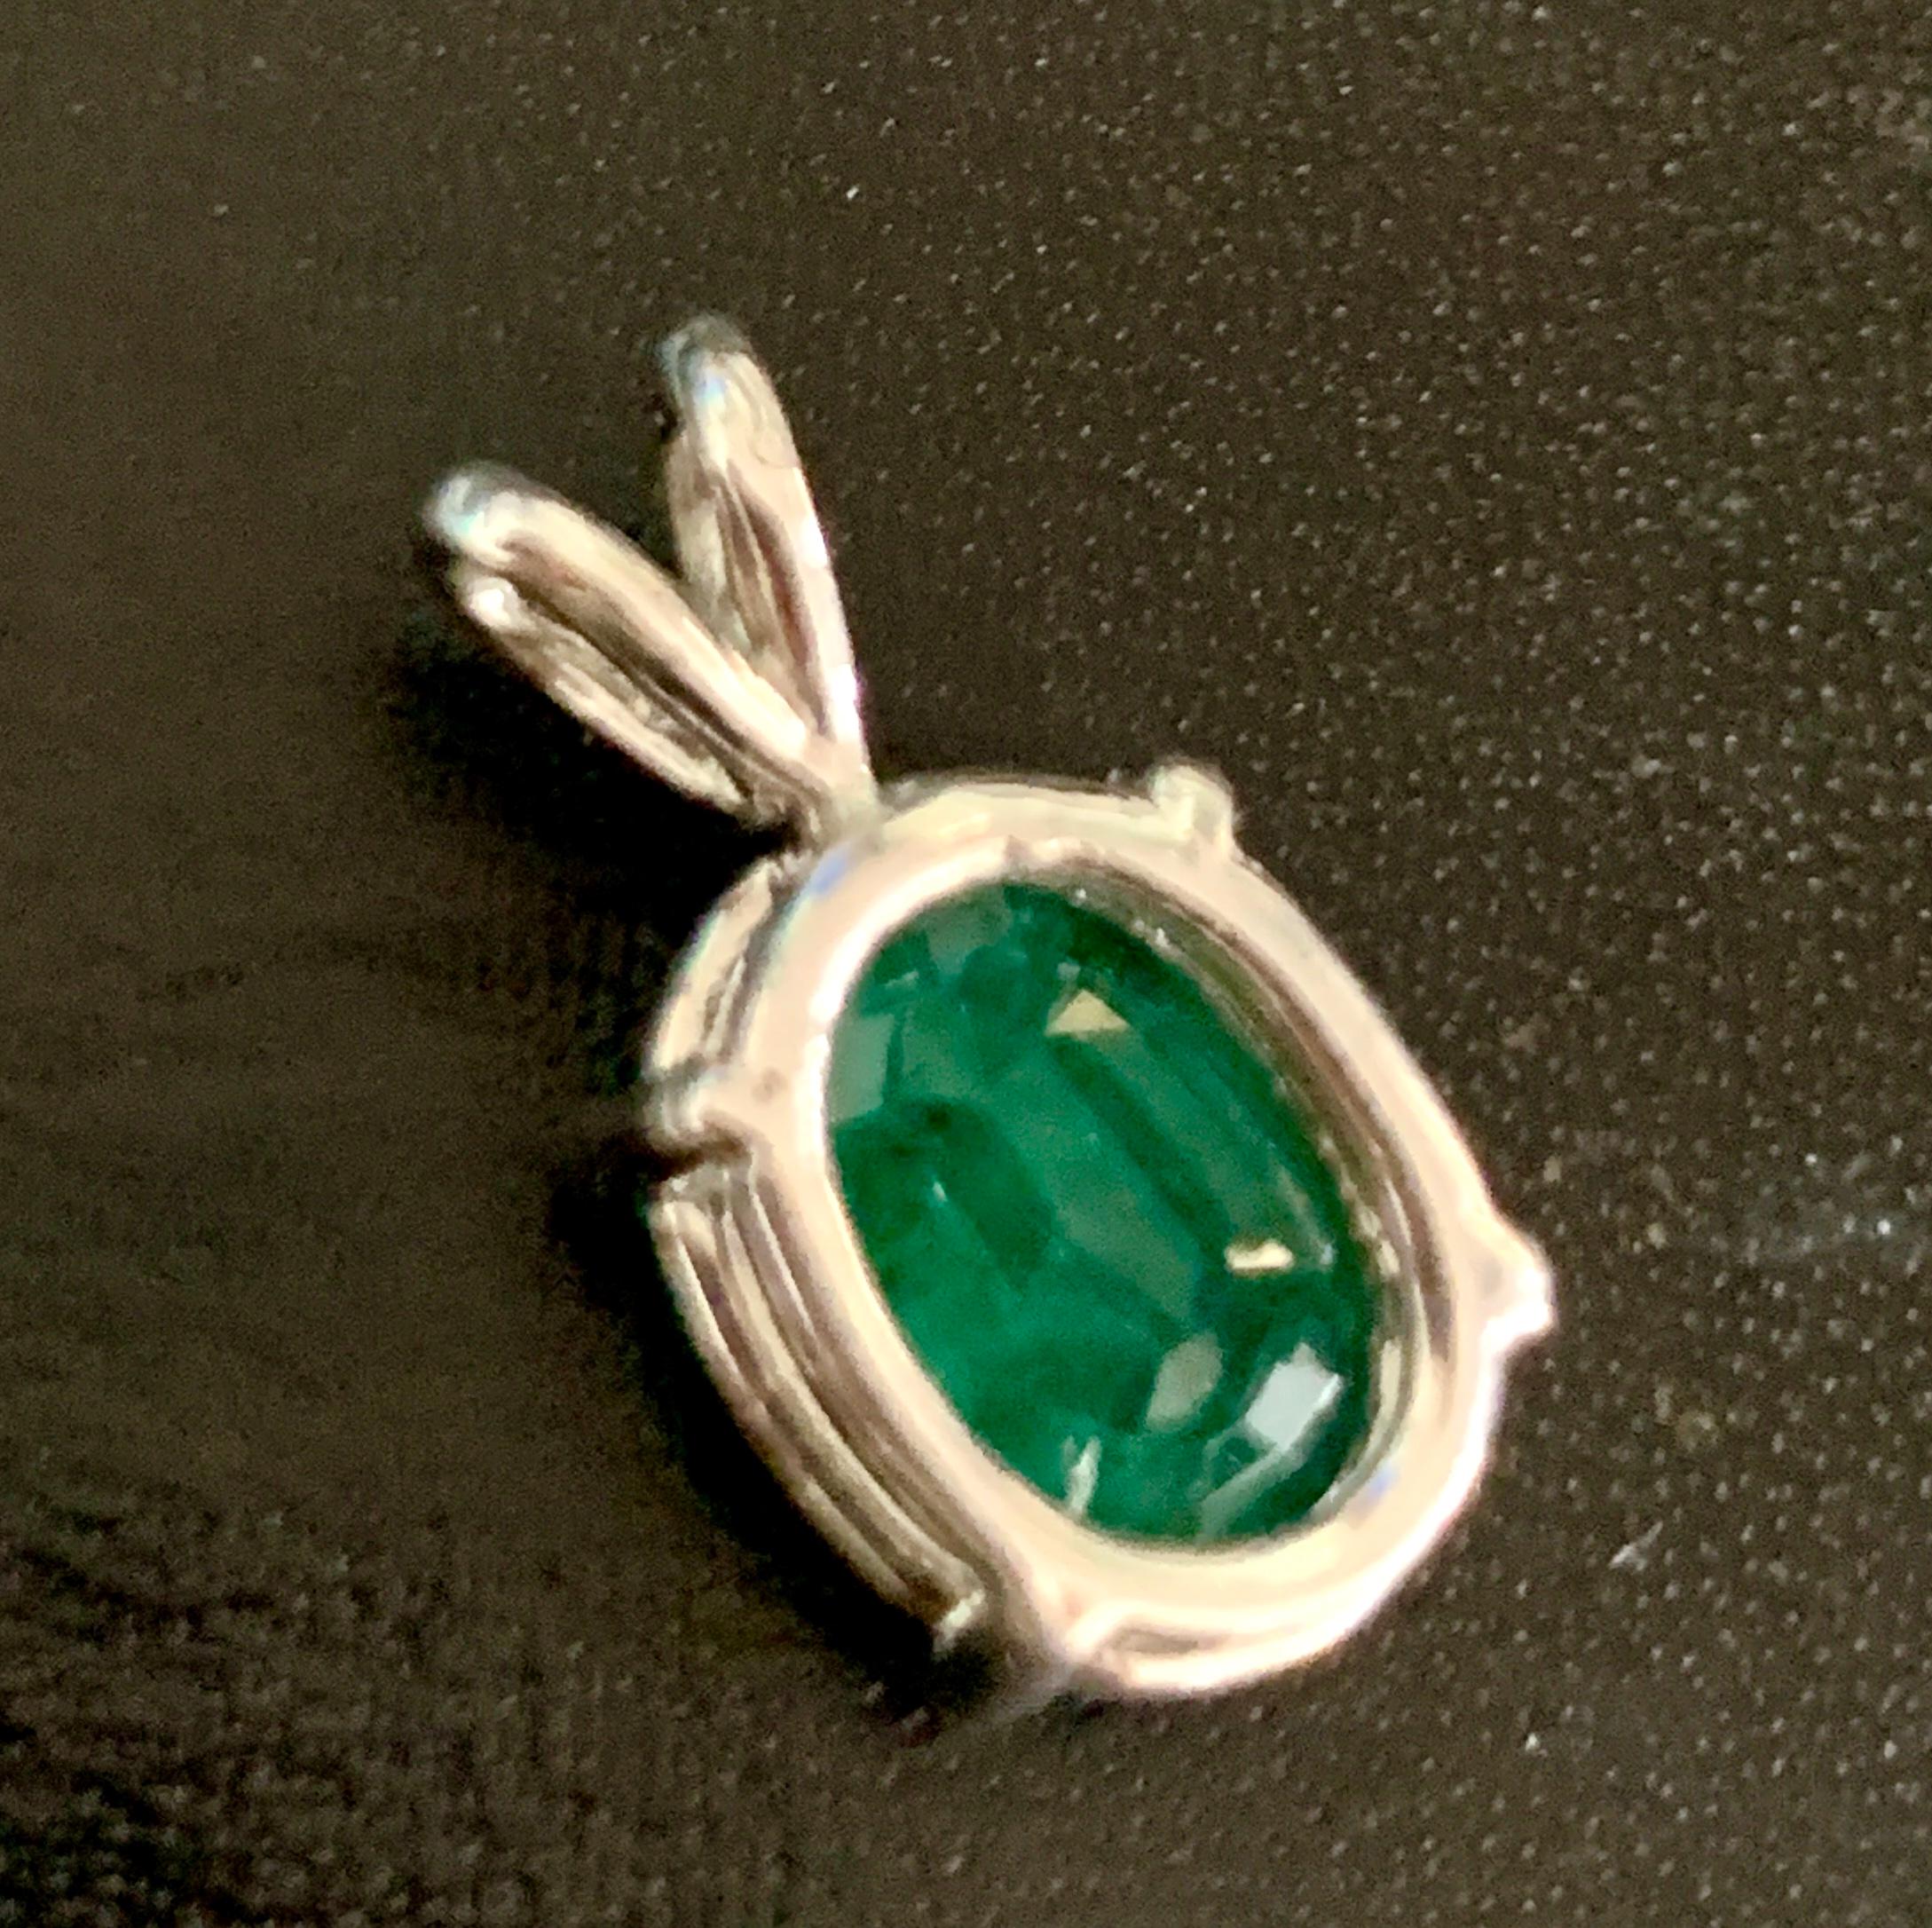 Oval Cut 2.5 Carat Oval Shape Emerald Pendant or Necklace 14 Karat White Gold with Chain